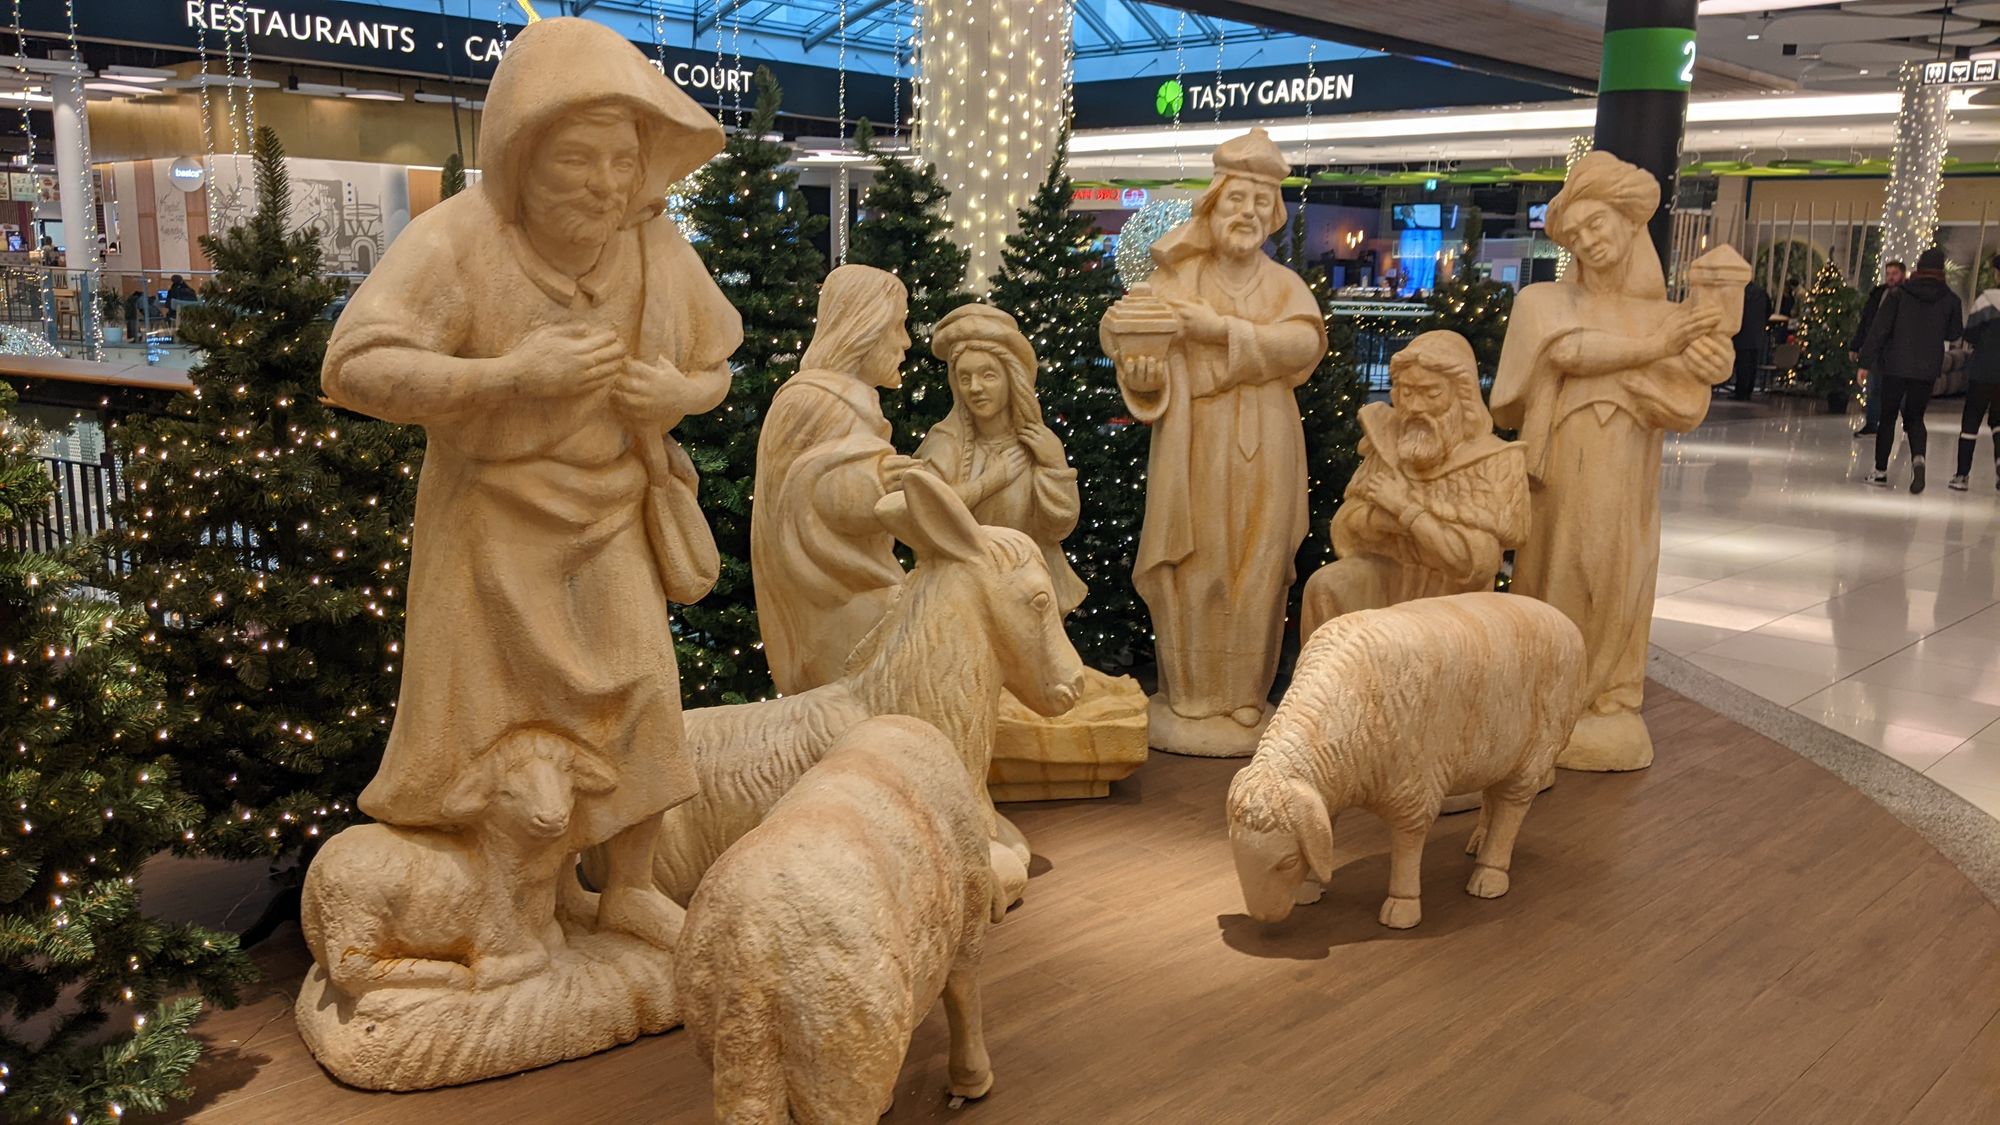 Sculpture of the Nativity Scene in a shopping mall